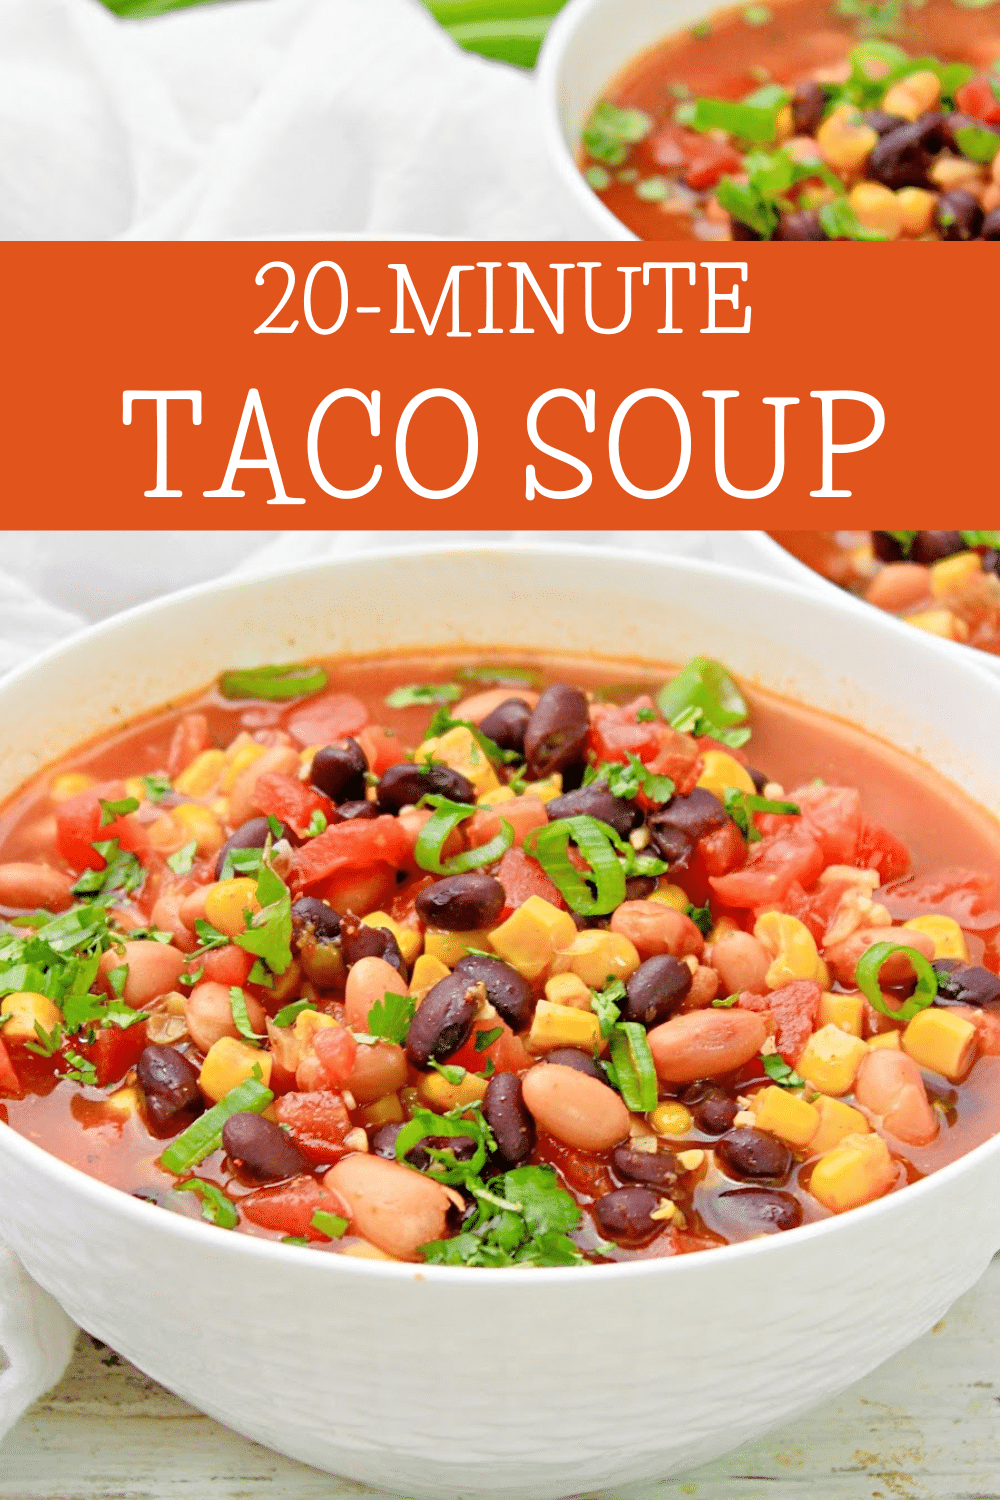 Taco Soup ~ All the taco flavor you love in a hearty and filling soup! Made with pantry ingredients and ready to serve in 20 minutes! via @thiswifecooks